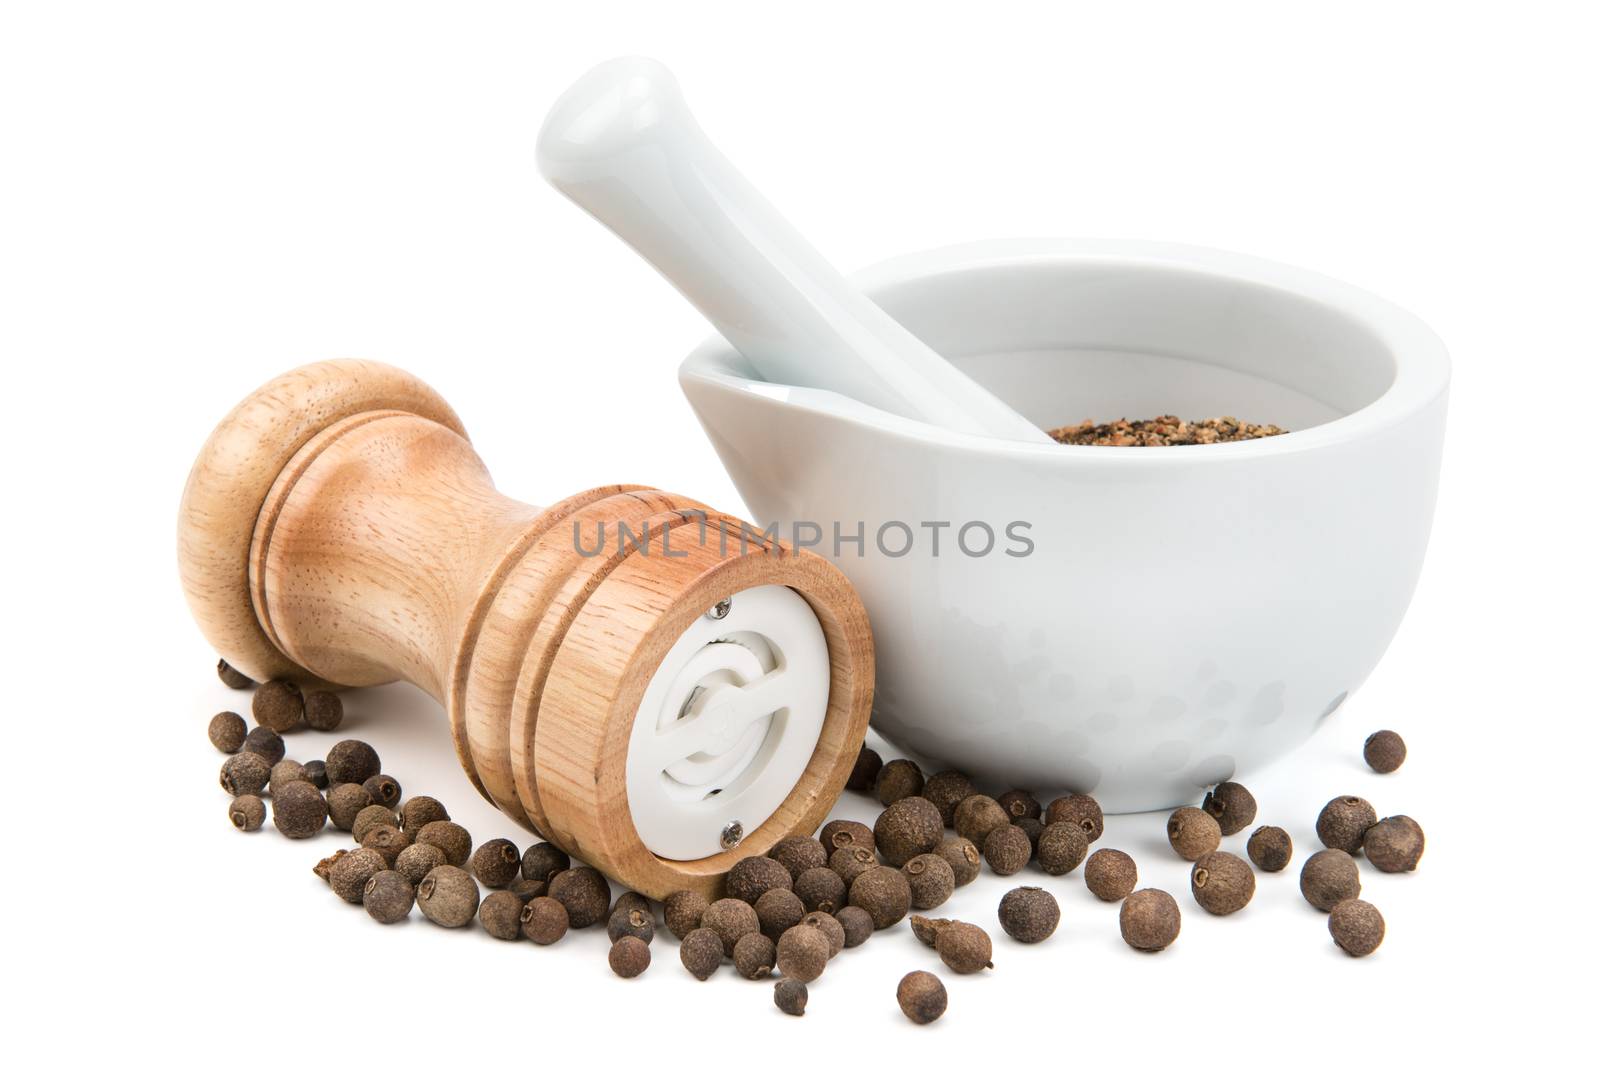 kitchen equipment for grinding spices by galina_velusceac